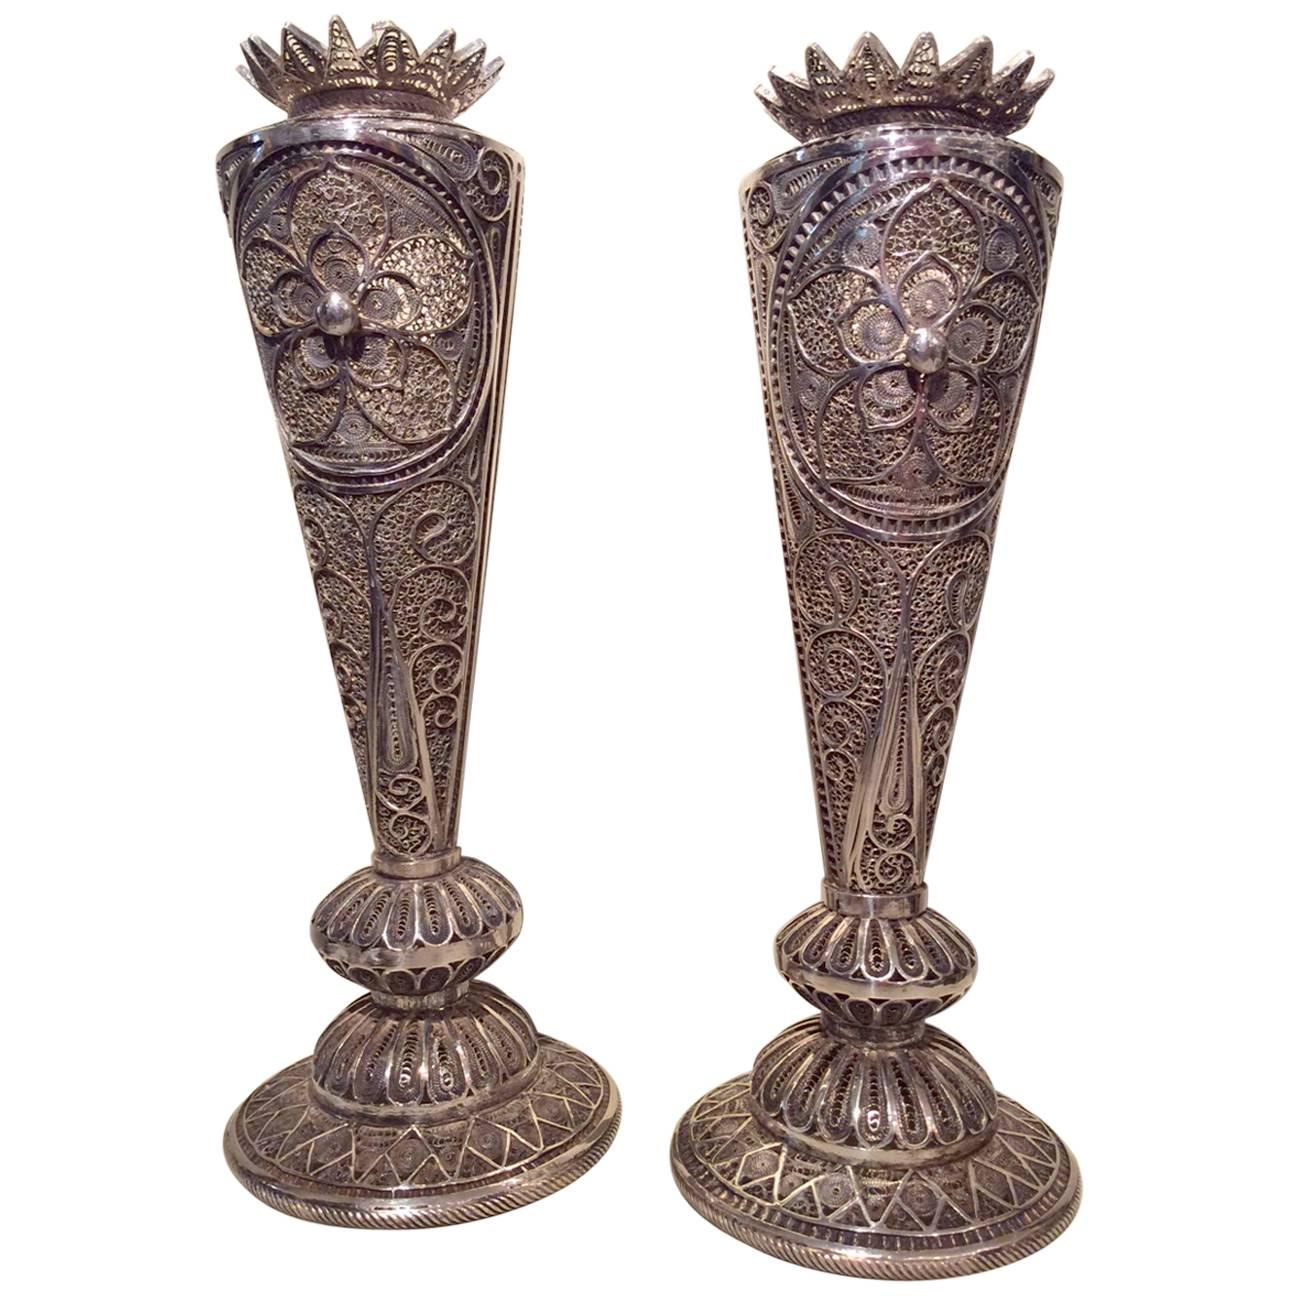 Silver Candlesticks Decorated in Silver Filigree, Early 19th Century